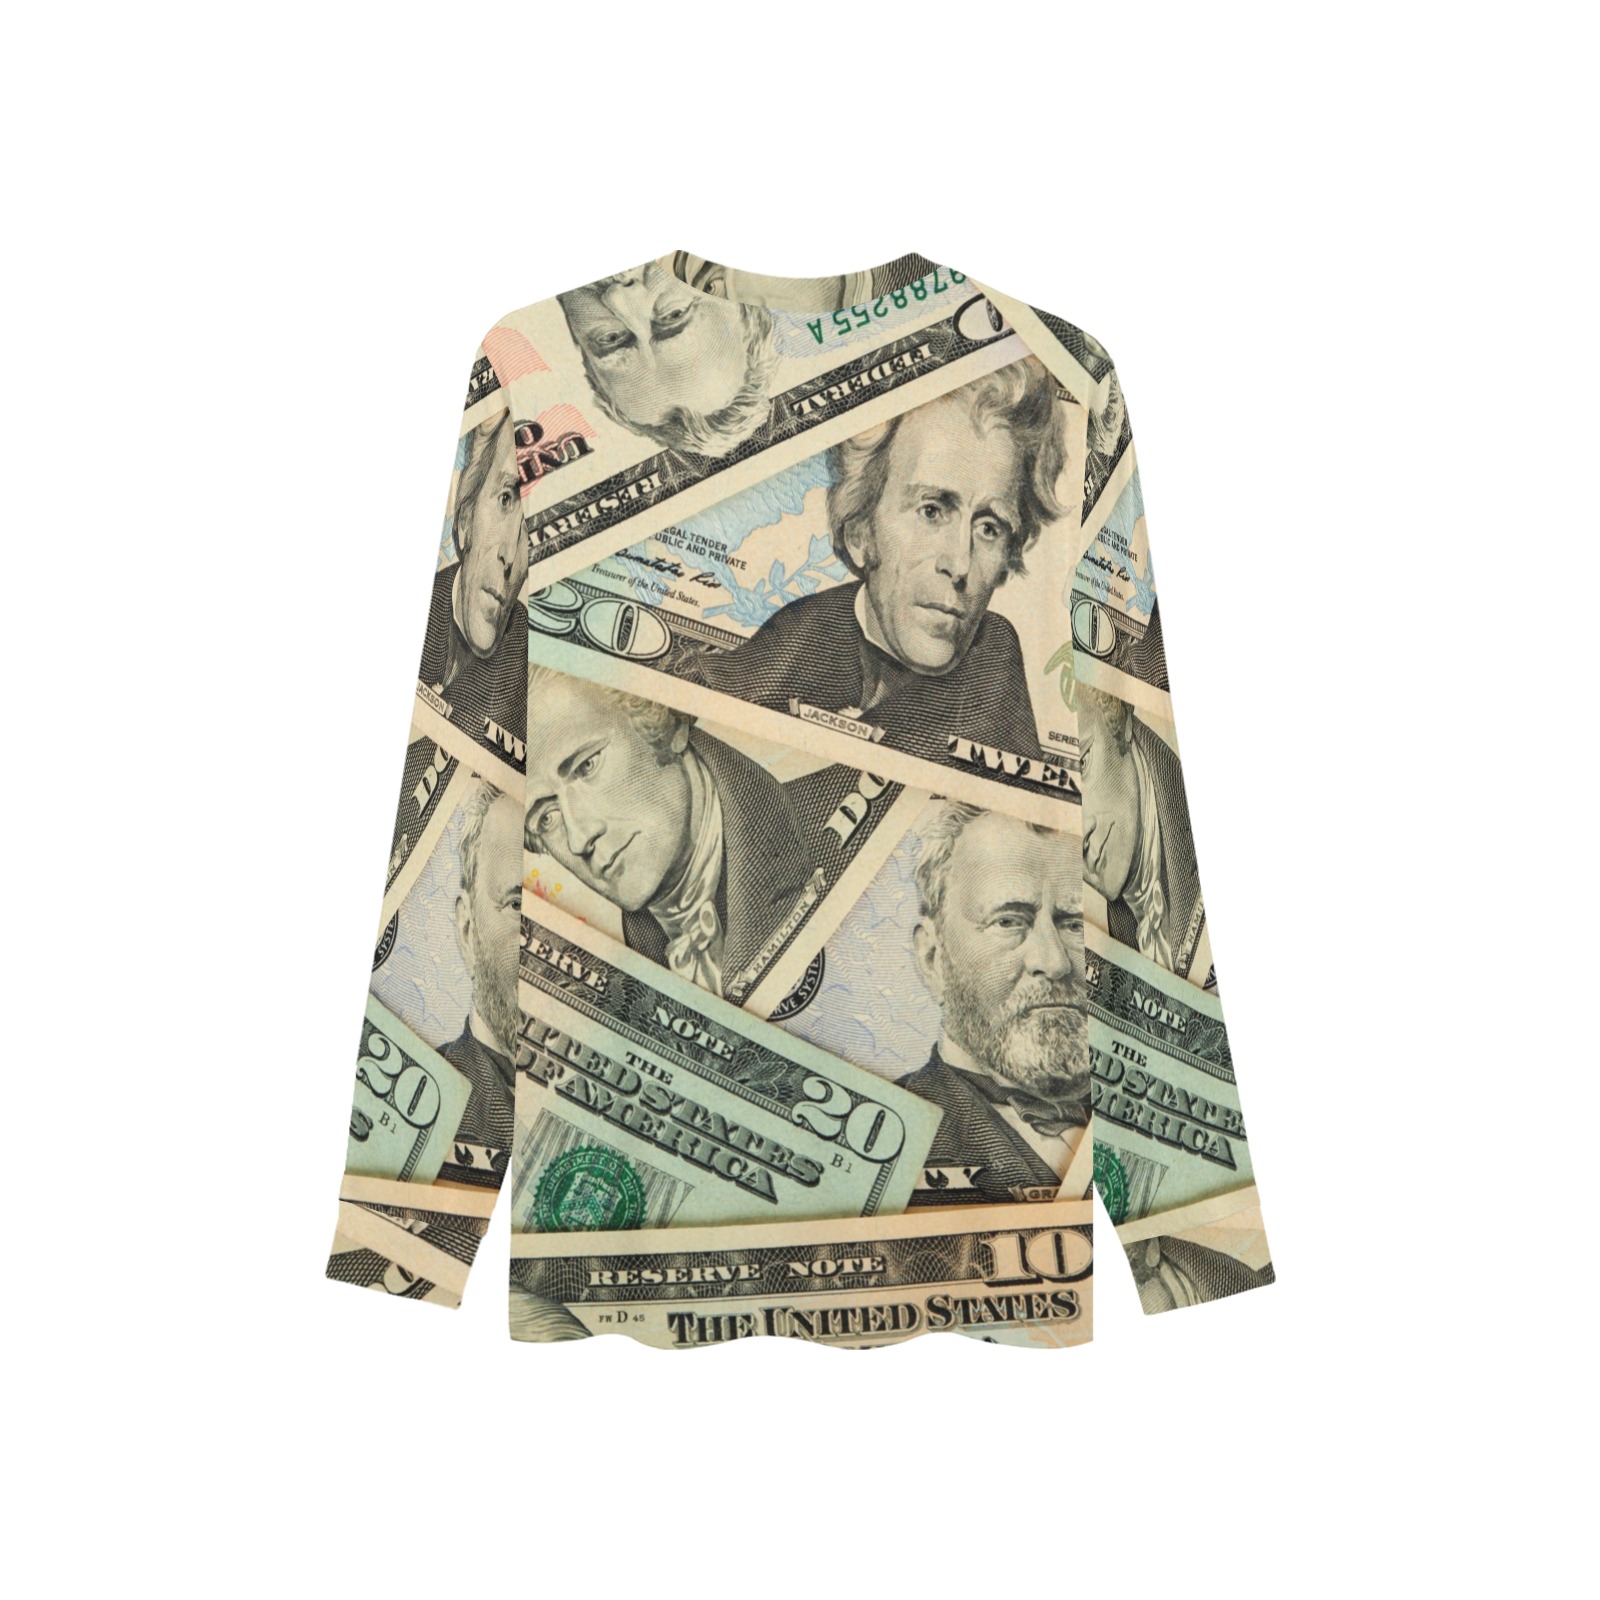 US PAPER CURRENCY Men's Pajama Top with Custom Cuff